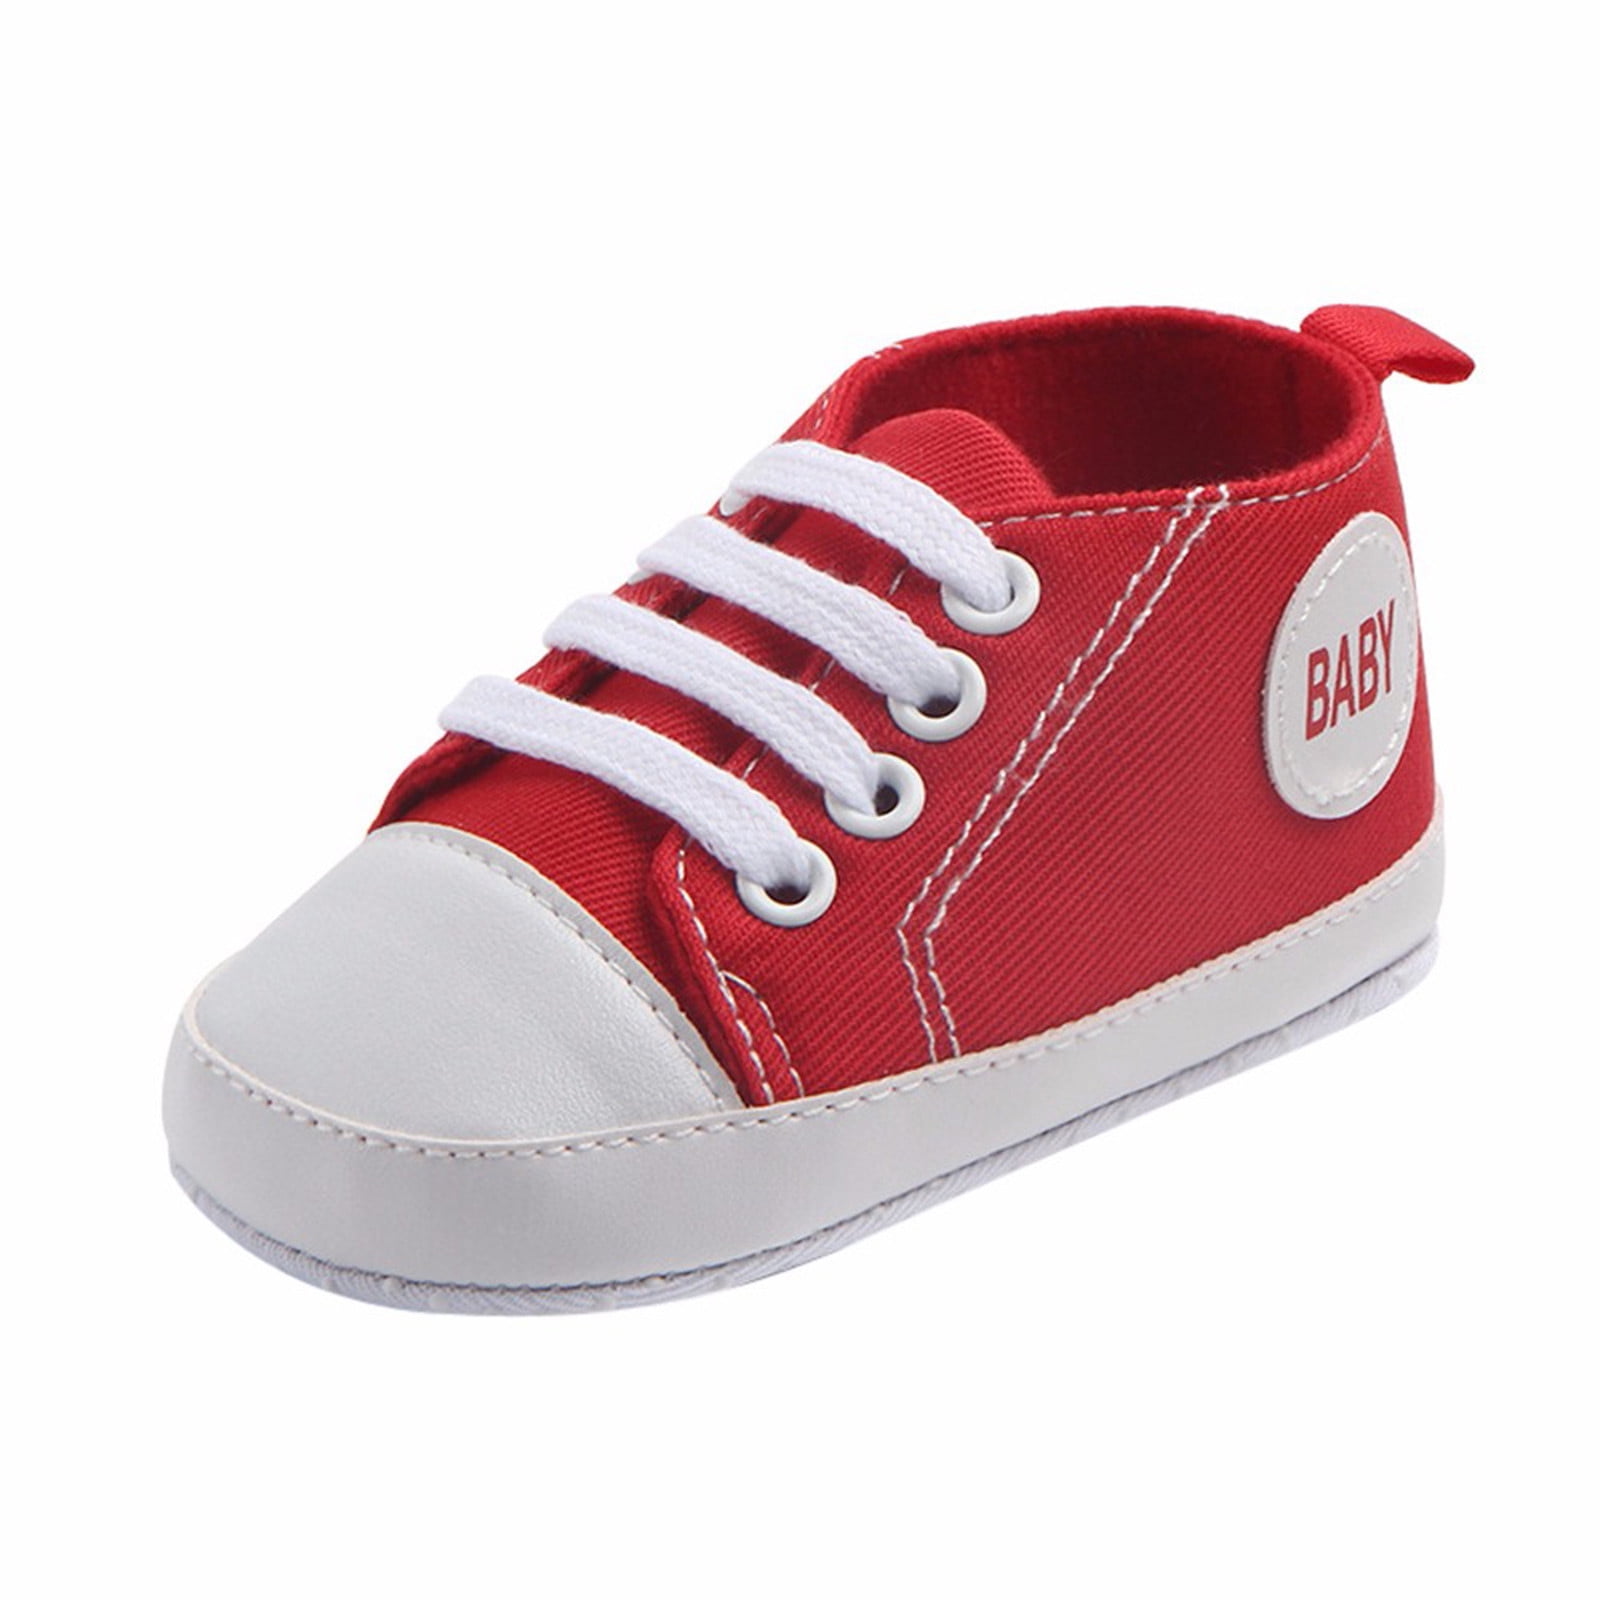 JGTDBPO Baby Shoes For Toddler Boys Girls First Walking Shoes Infant ...